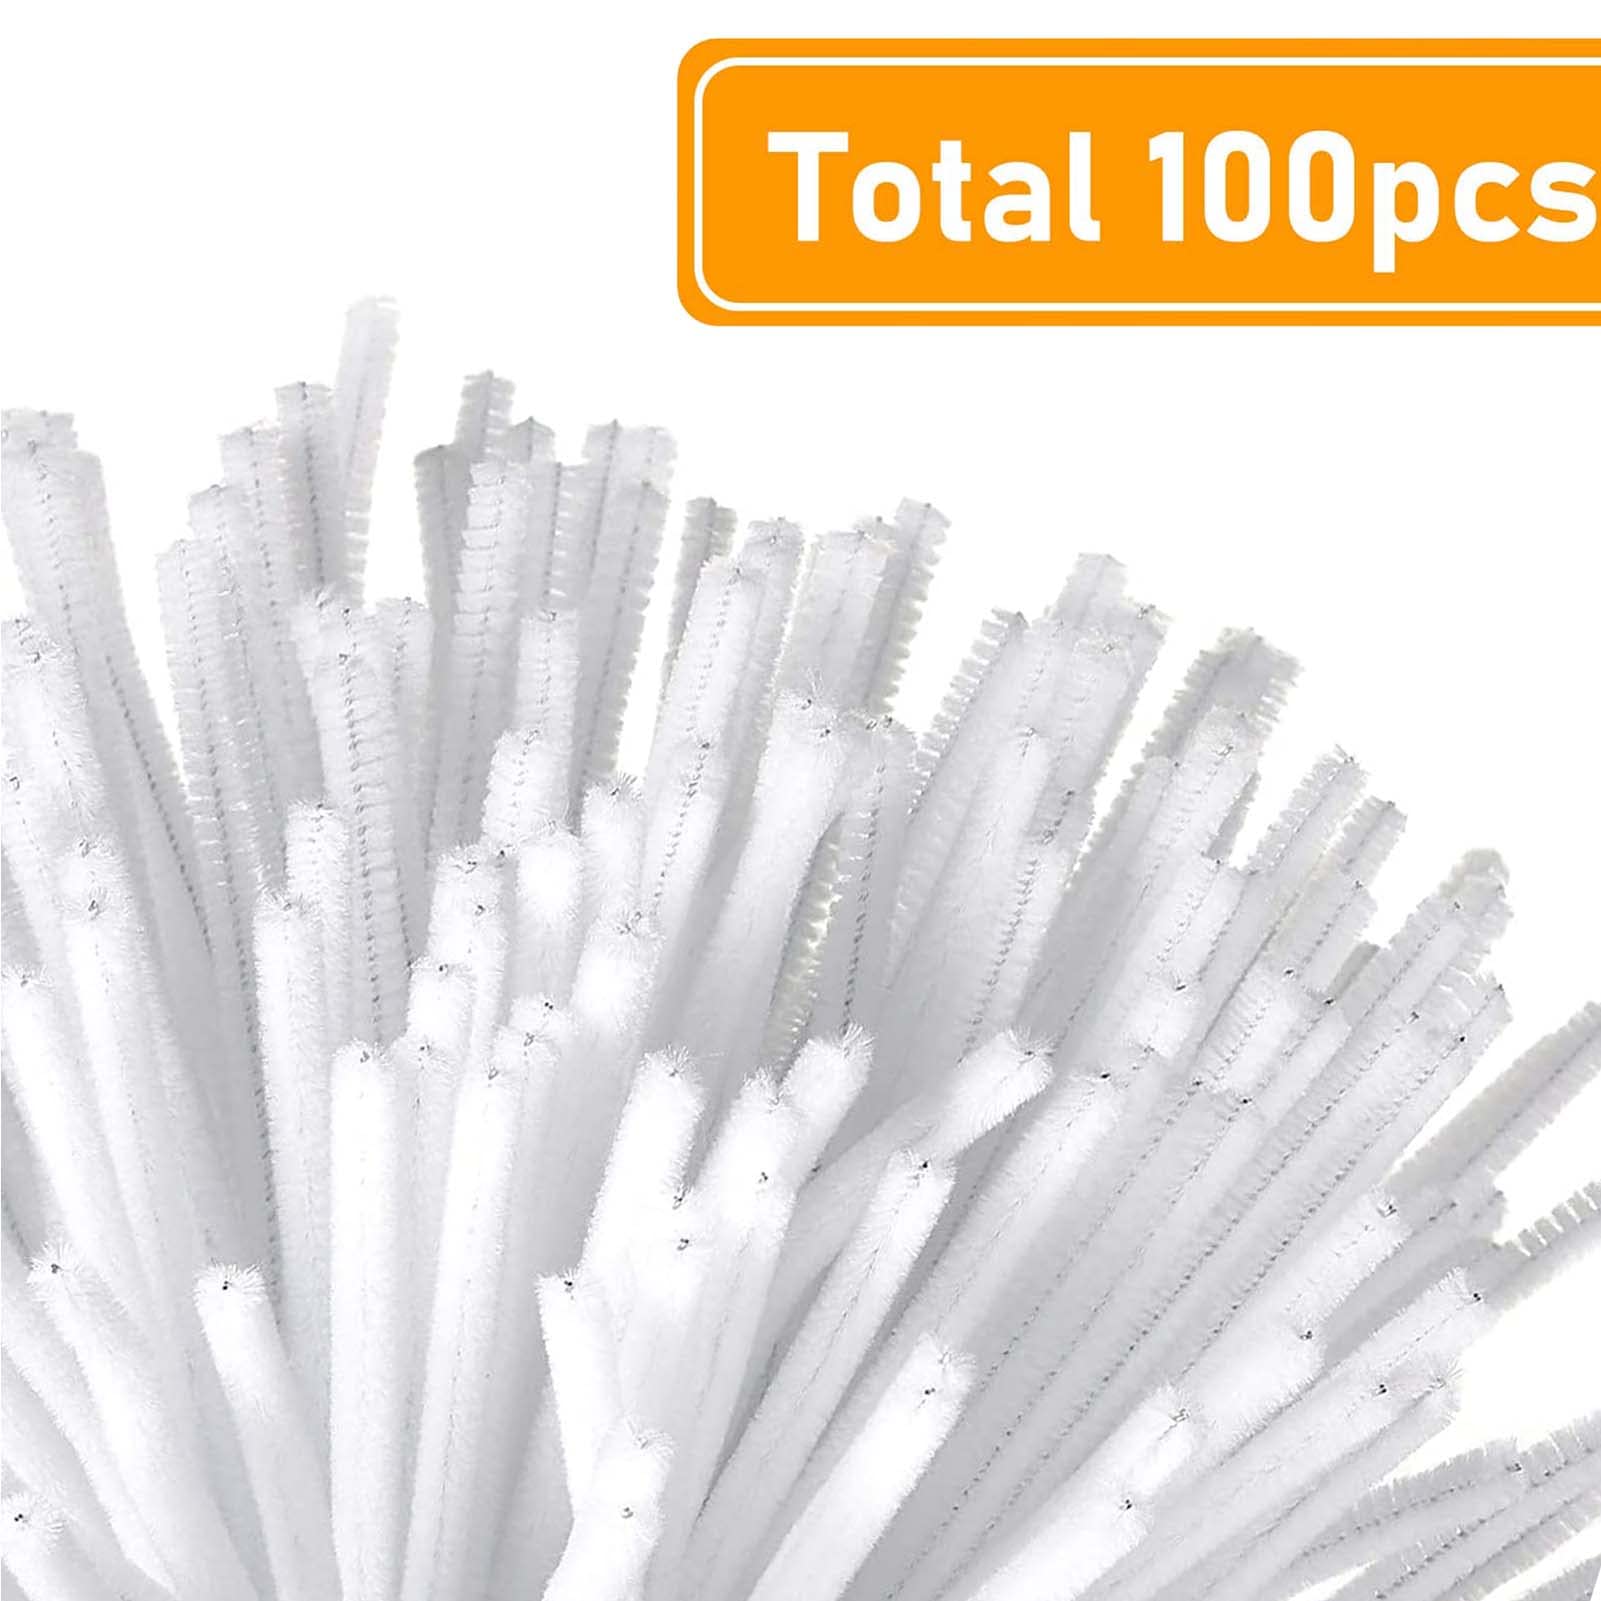  Caydo 200 Pieces White Pipe Cleaners Craft Chenille Stems  For DIY Art Creative Crafts Party Decorations